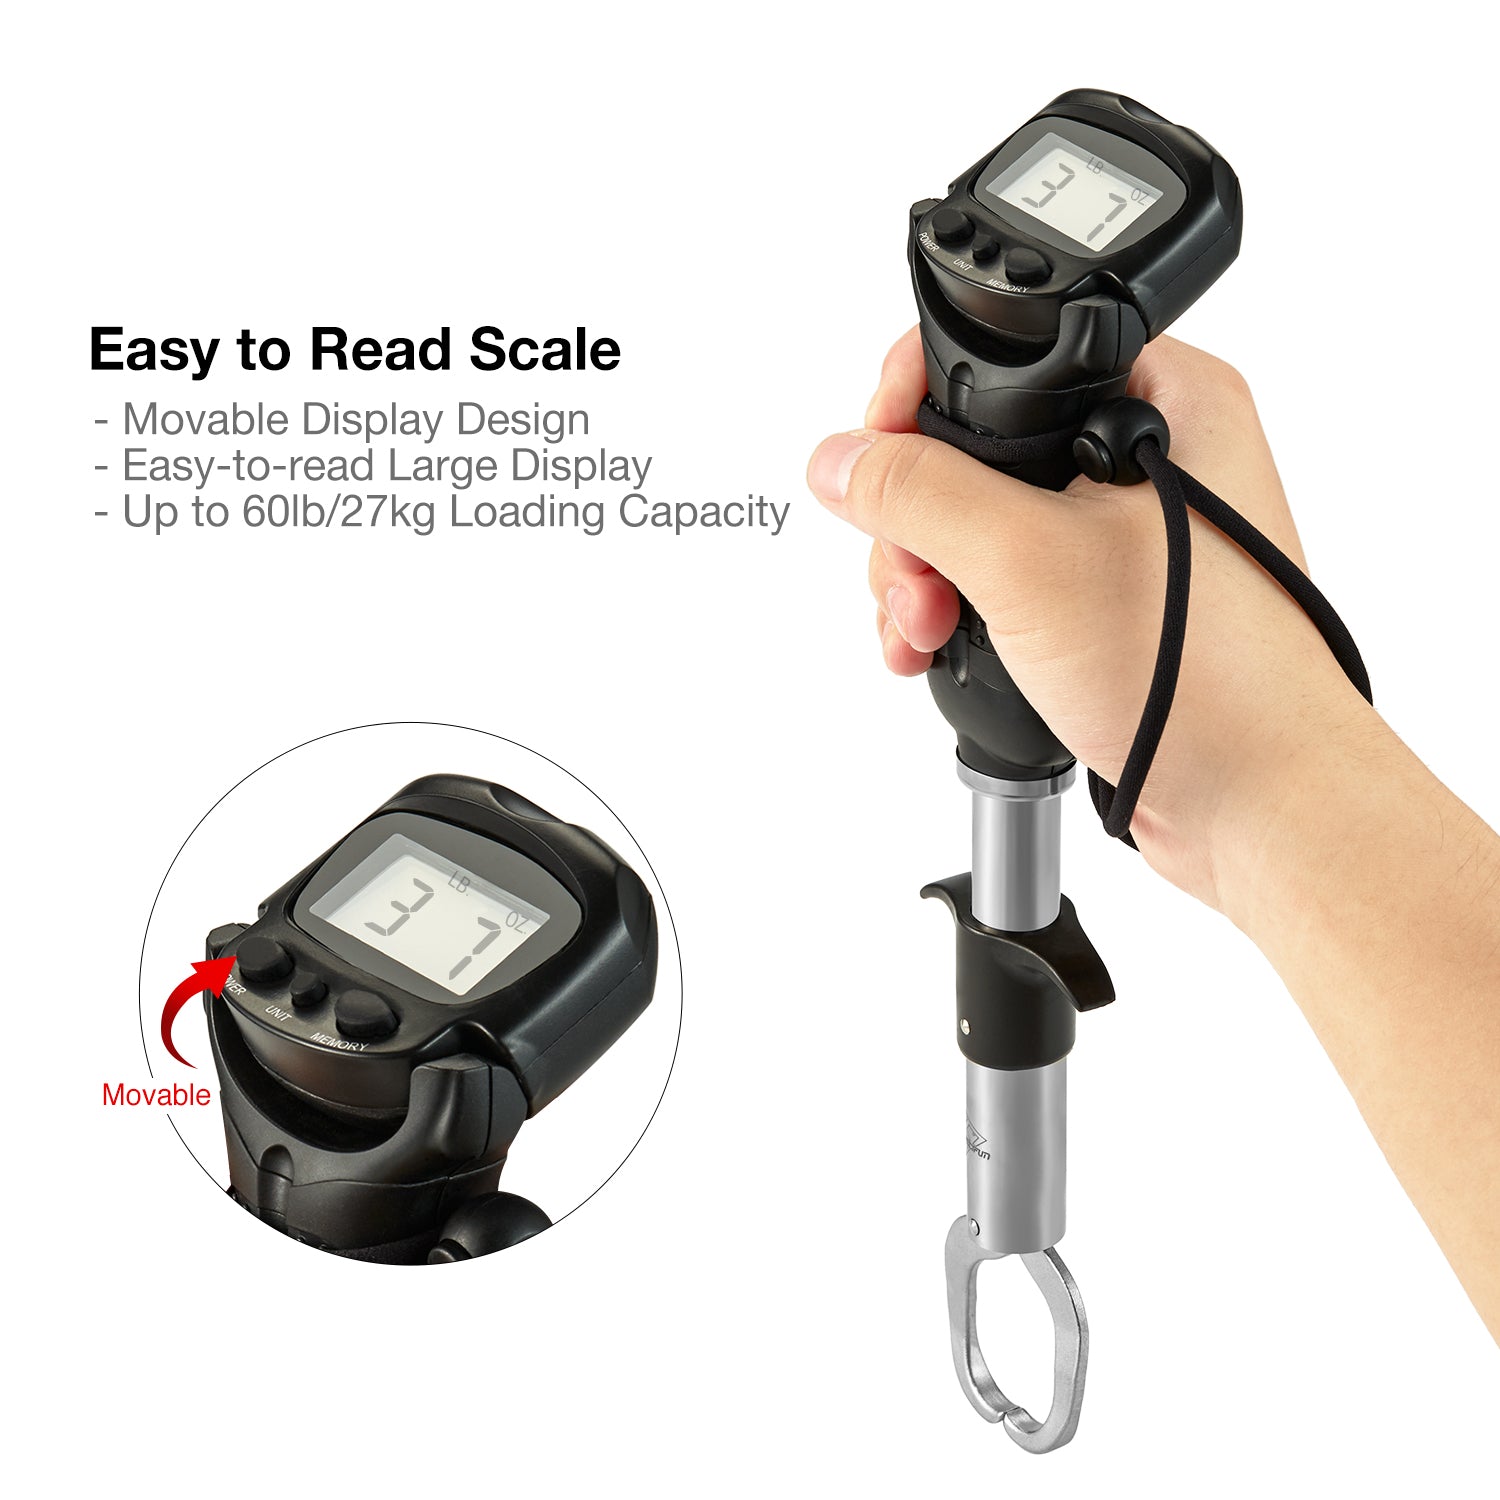 Digital Fish Grip Scale,3 in 1 Digital Fish Grip Scale Fish Grabber Scale  Unparalleled Experience 